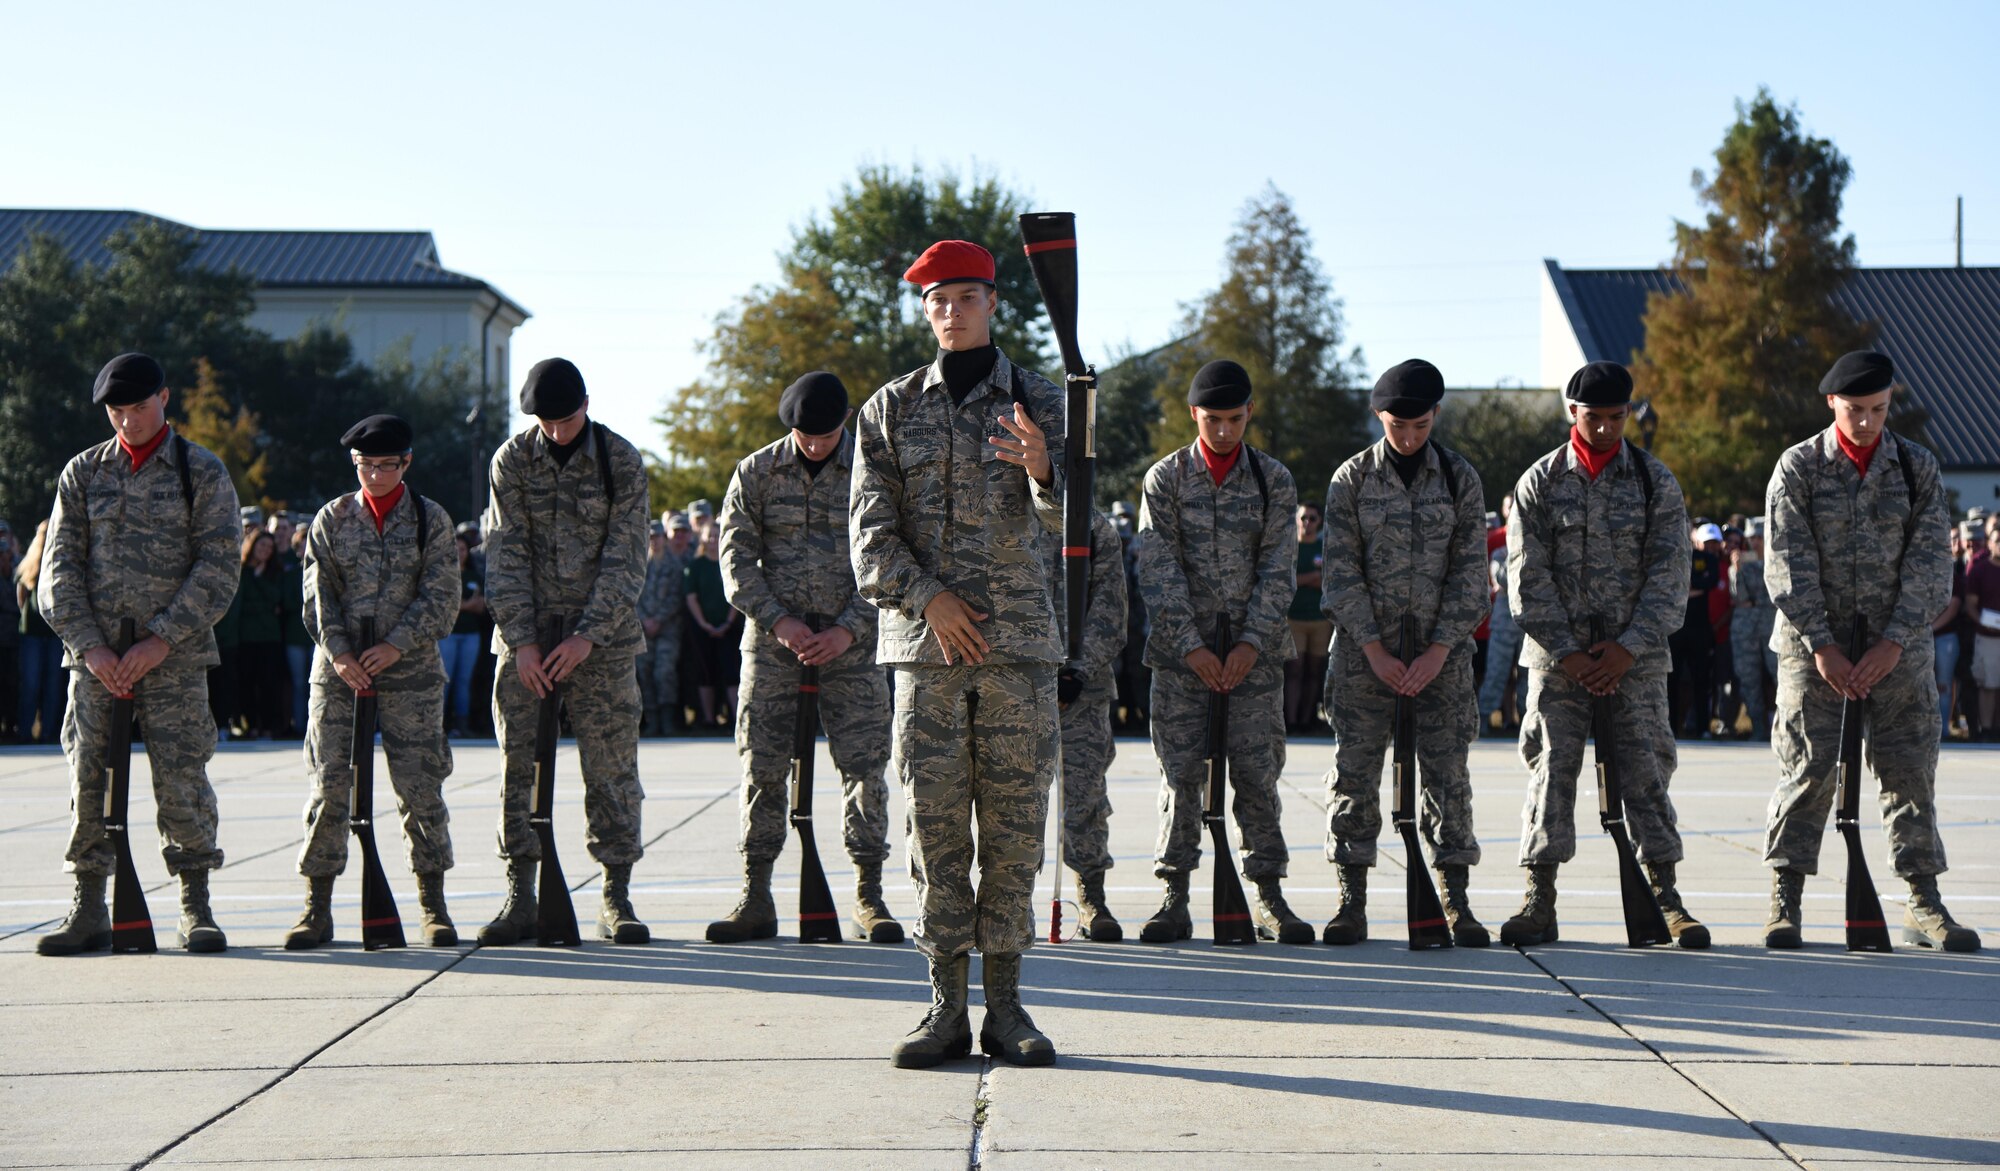 Members of the 336th Training Squadron freestyle drill team perform during the 81st Training Group drill down at the Levitow Training Support Facility drill pad Nov. 4, 2016, on Keesler Air Force Base, Miss. The quarterly drill down featured an open ranks inspection, regulation drill routine and freestyle drill routine categories. The 81st TRG’s four non-prior service training squadrons competed in the competition, with the 334th TRS “Gators” taking home the overall first place. (U.S. Air Force photo by Kemberly Groue/Released)